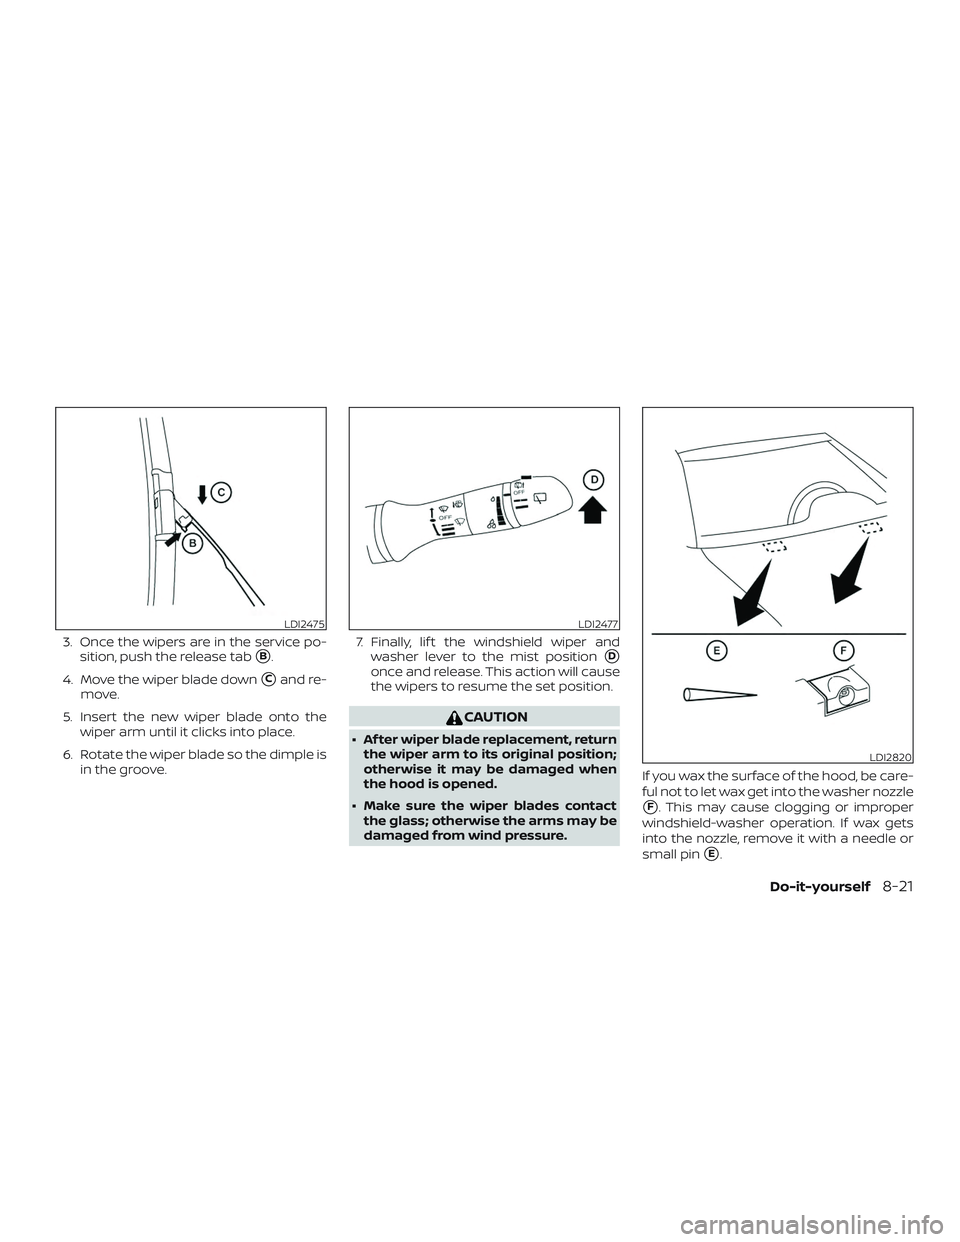 NISSAN ROGUE 2020  Owner´s Manual 3. Once the wipers are in the service po-sition, push the release tab
B.
4. Move the wiper blade down
Cand re-
move.
5. Insert the new wiper blade onto the wiper arm until it clicks into place.
6. R